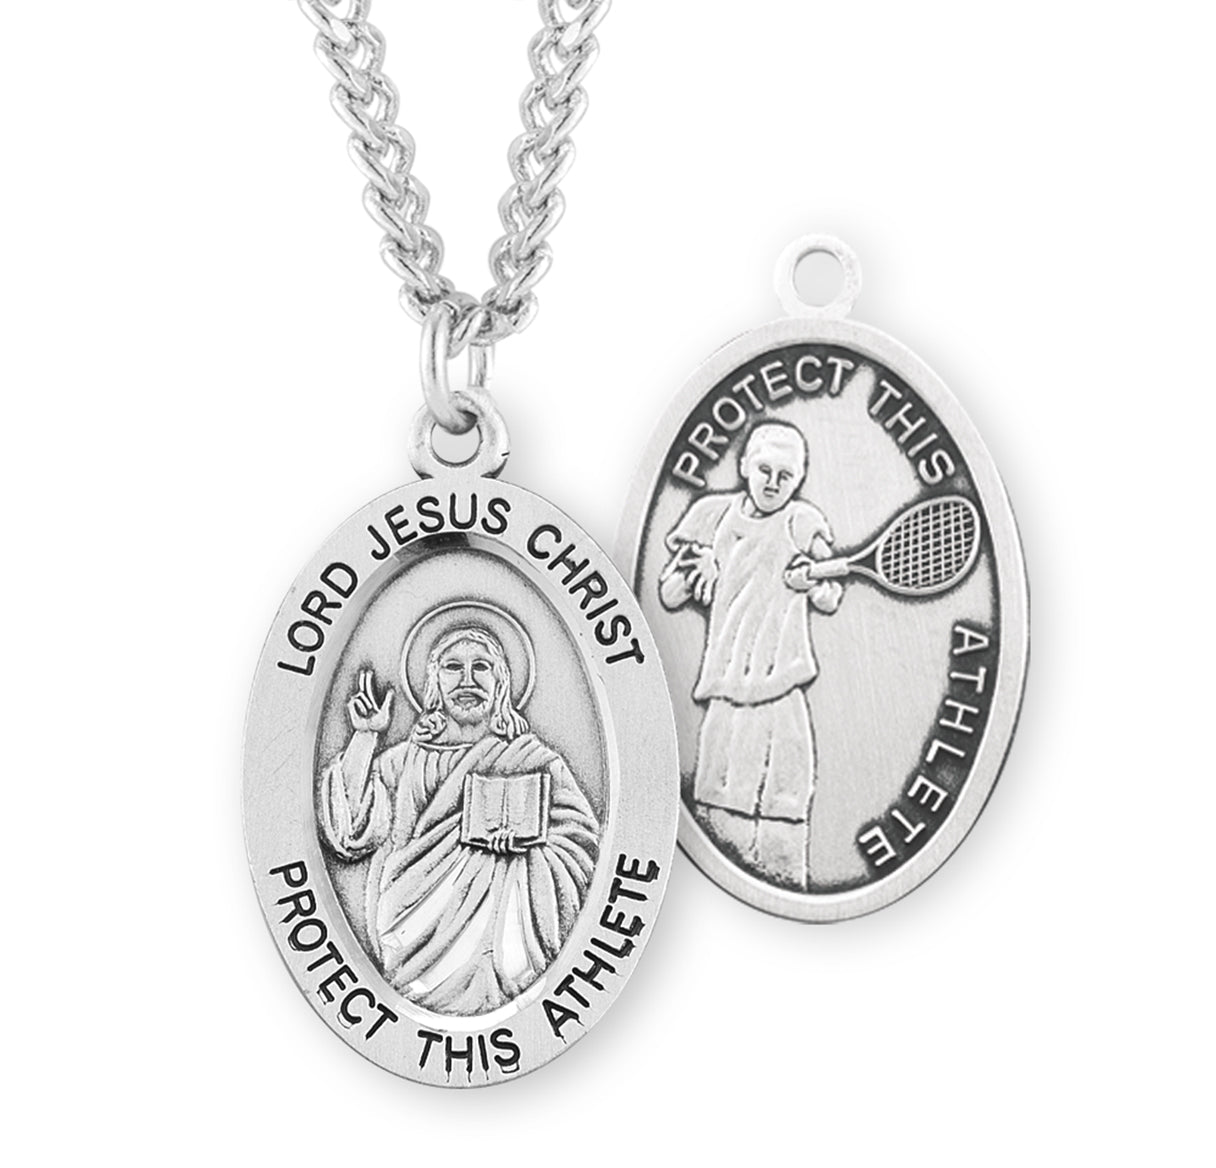 Lord Jesus Christ Oval Sterling Silver Tennis Male Athlete Medal